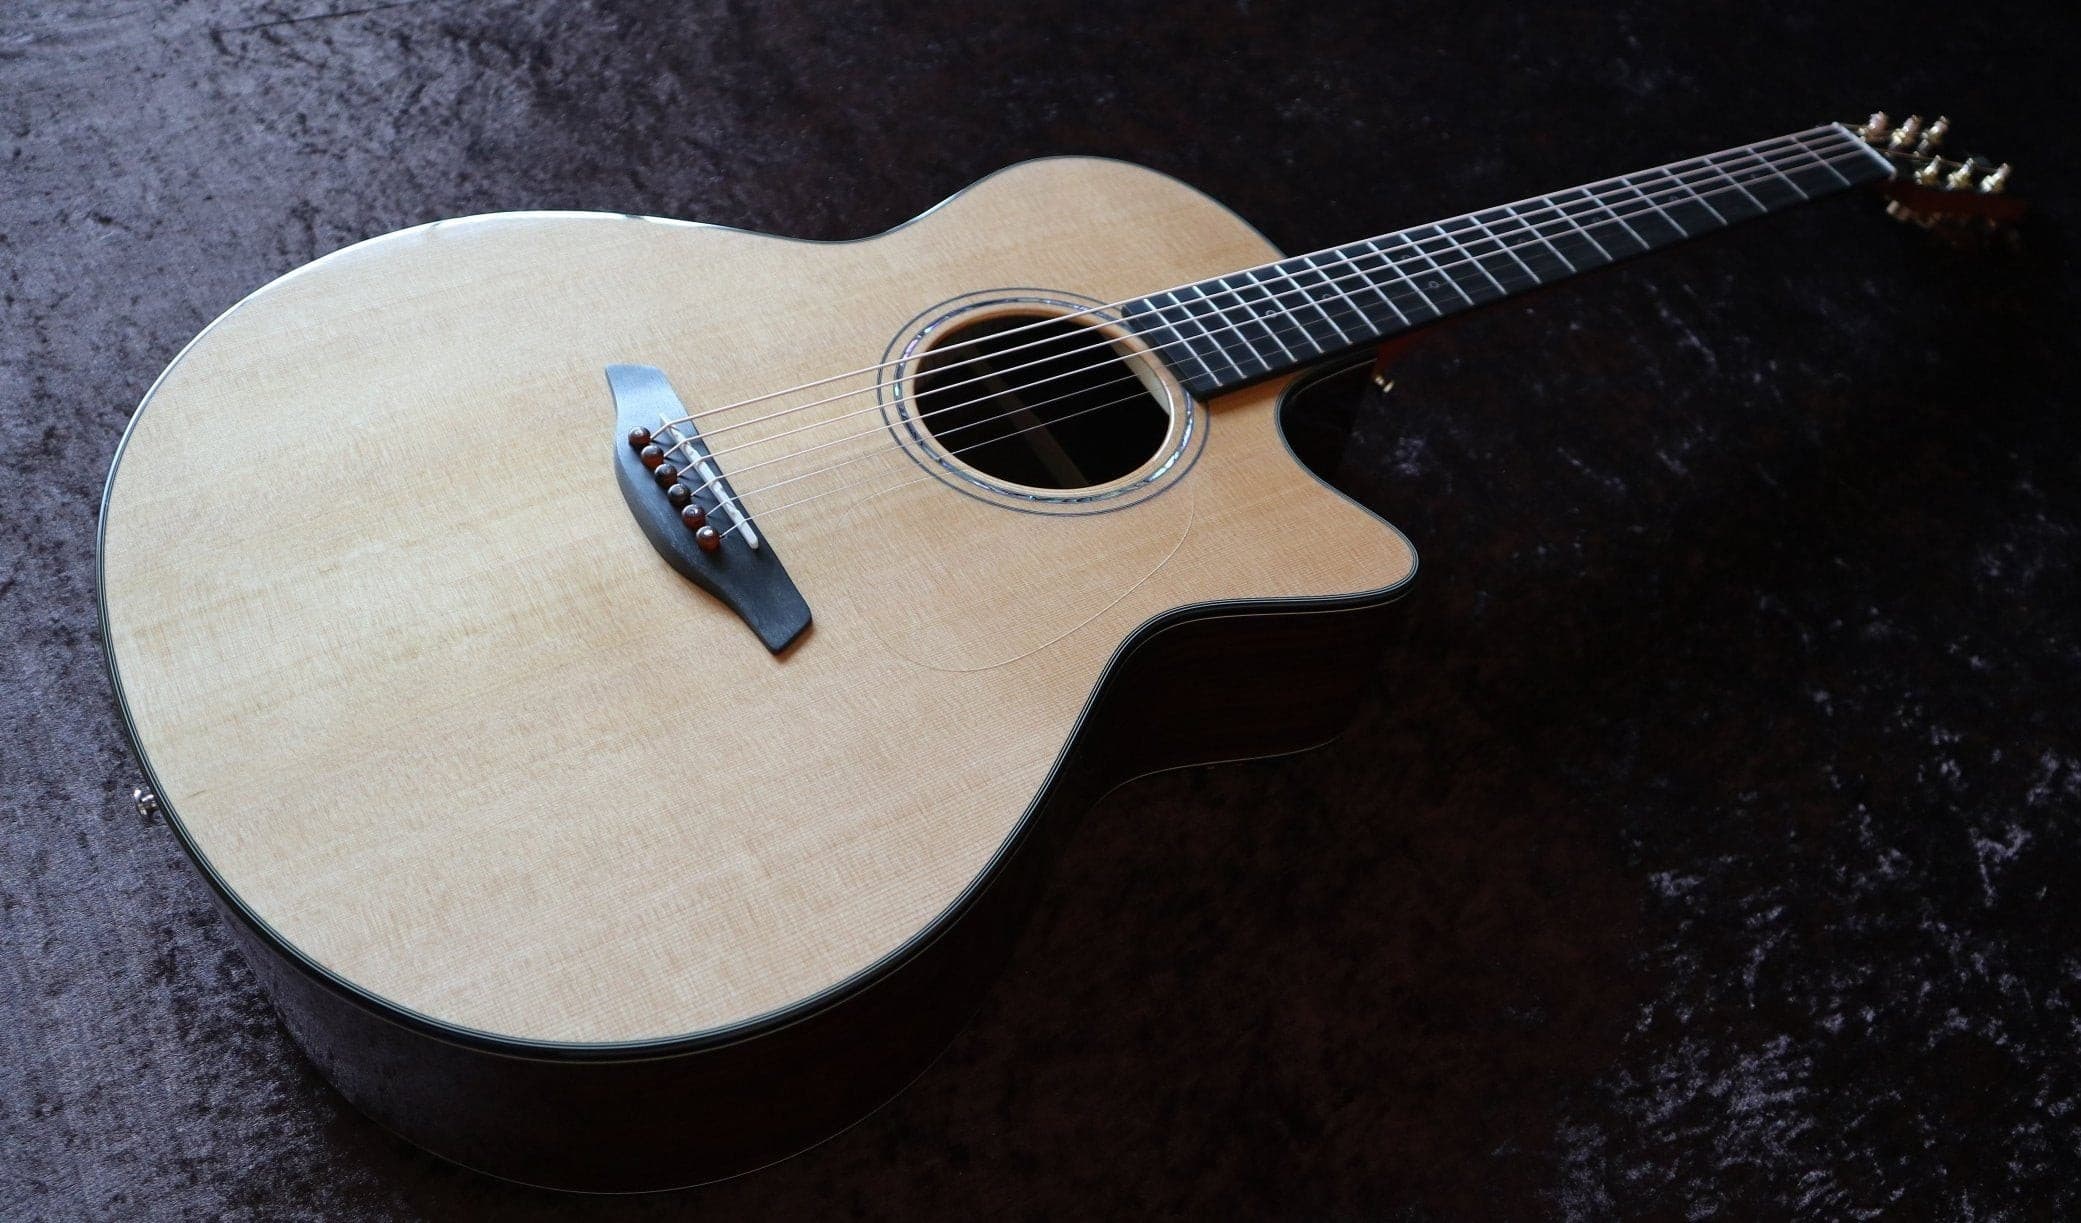 Furch Yellow Gc-CR Left Handed Acoustic Guitar Including UK Exclusive Inlays & Over £100 Of Added Value FREE, Acoustic Guitar for sale at Richards Guitars.